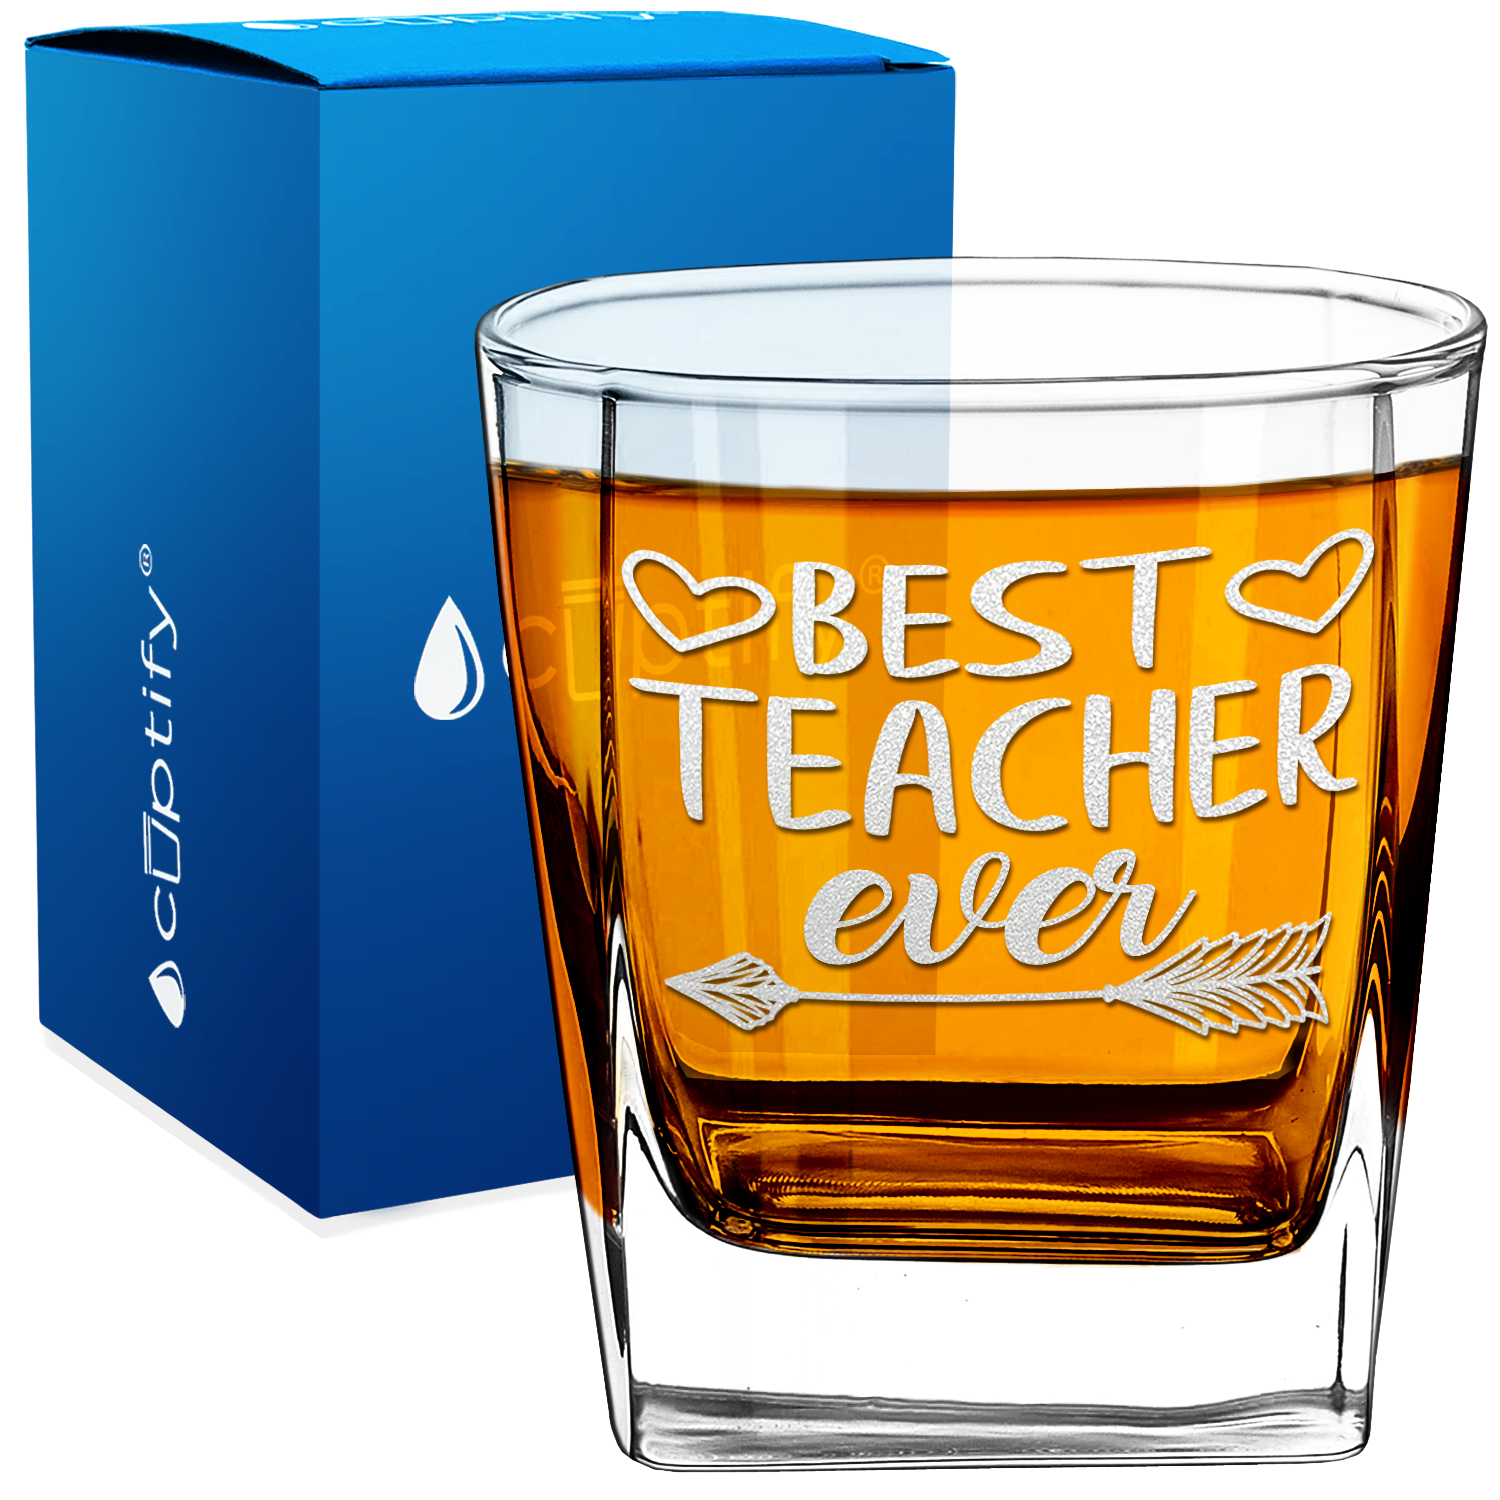 Best Teacher Ever Arrow on 12oz Double Old Fashioned Glass